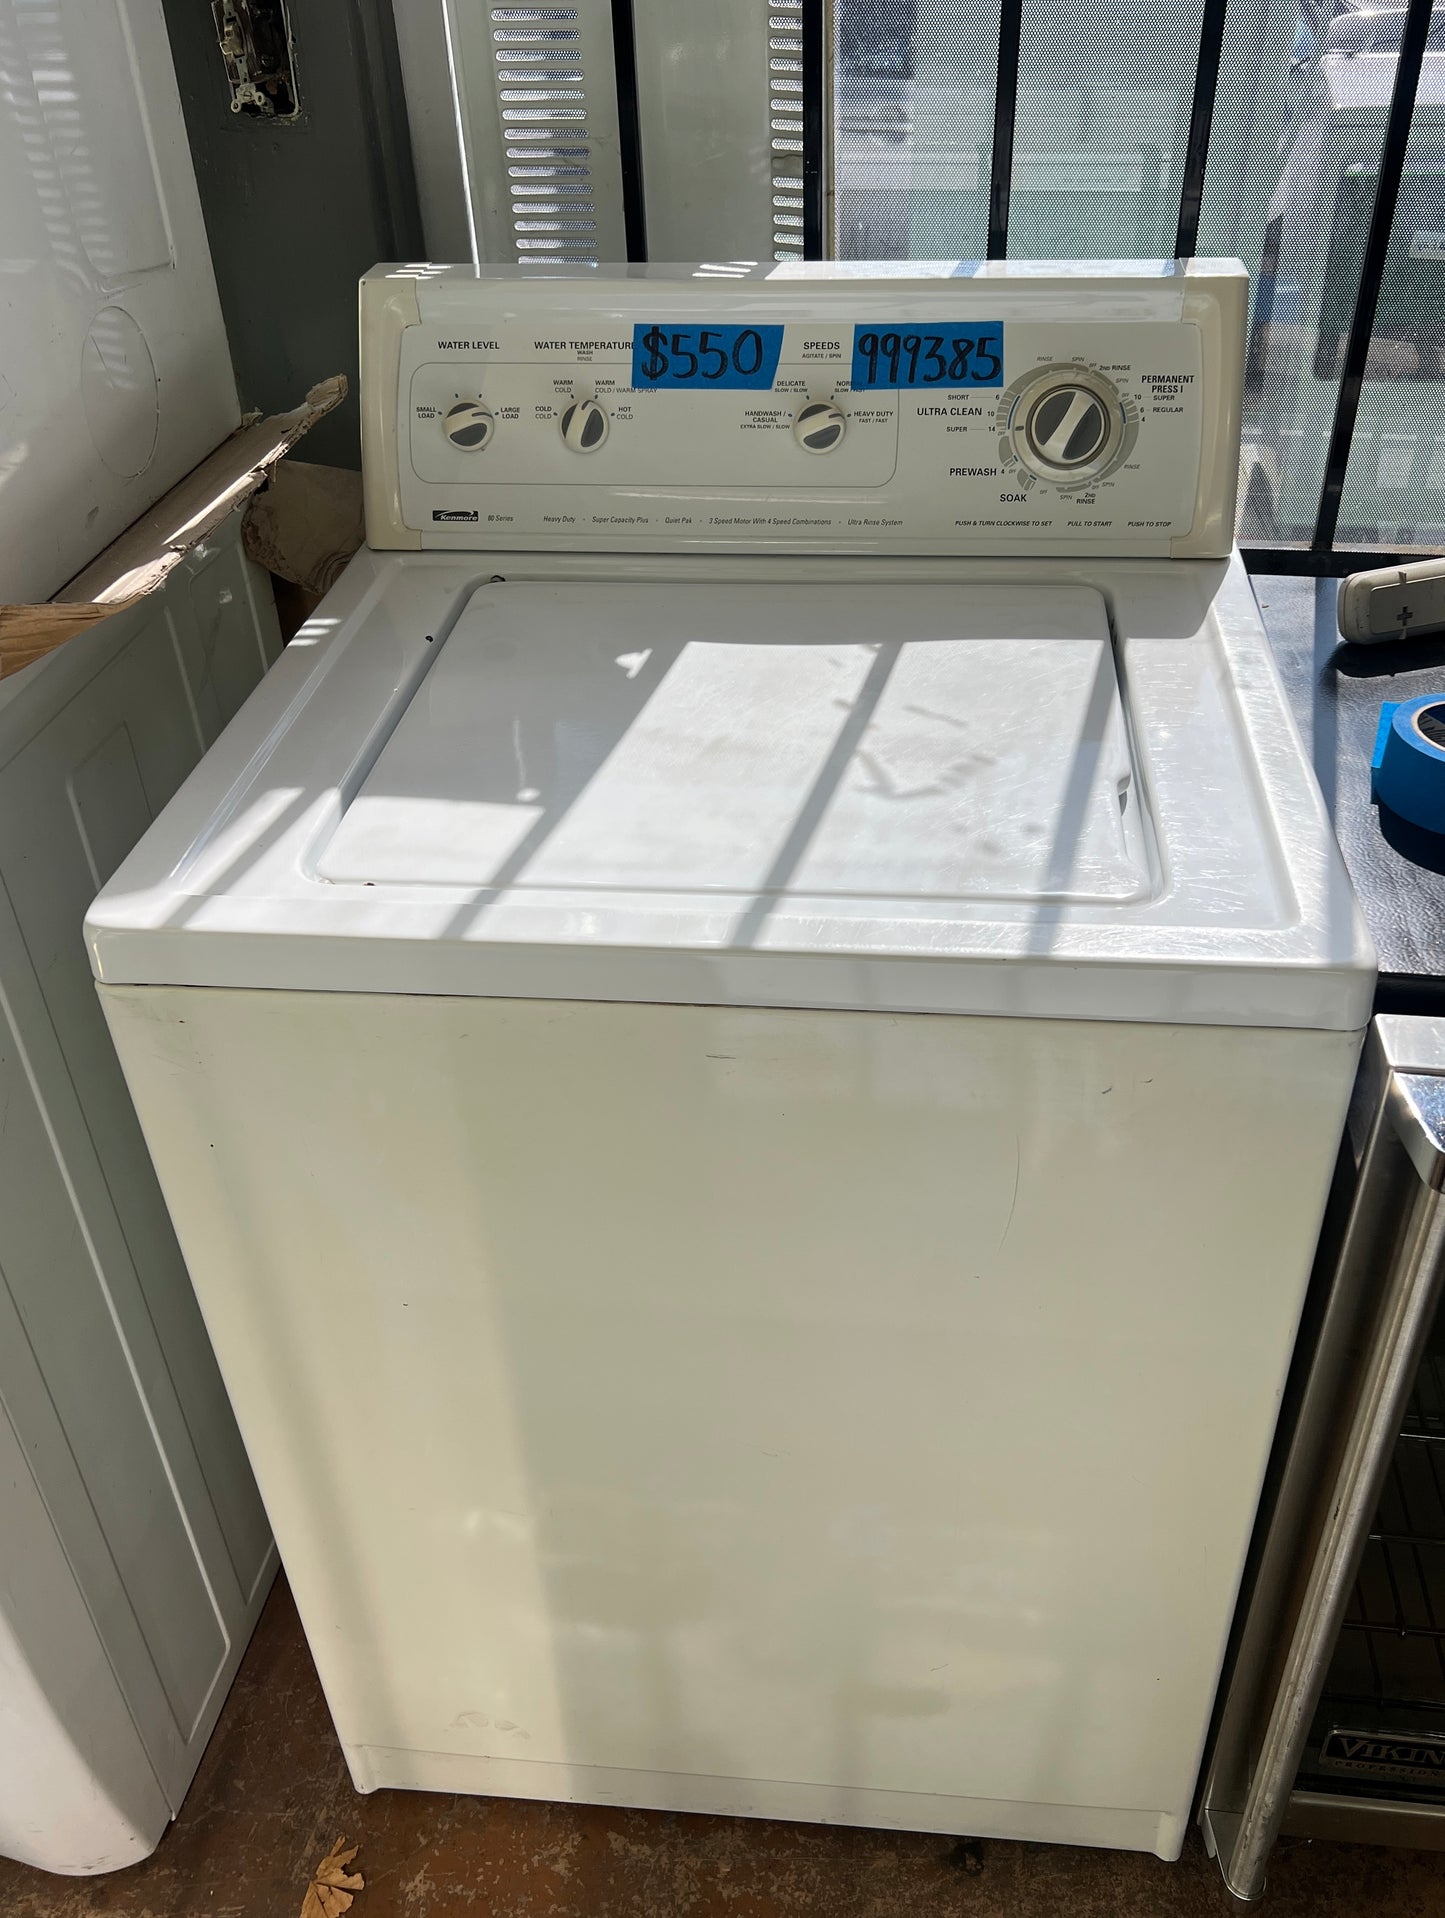 Kenmore 80 Series Top Load Washer White 888612 Used Working Condition